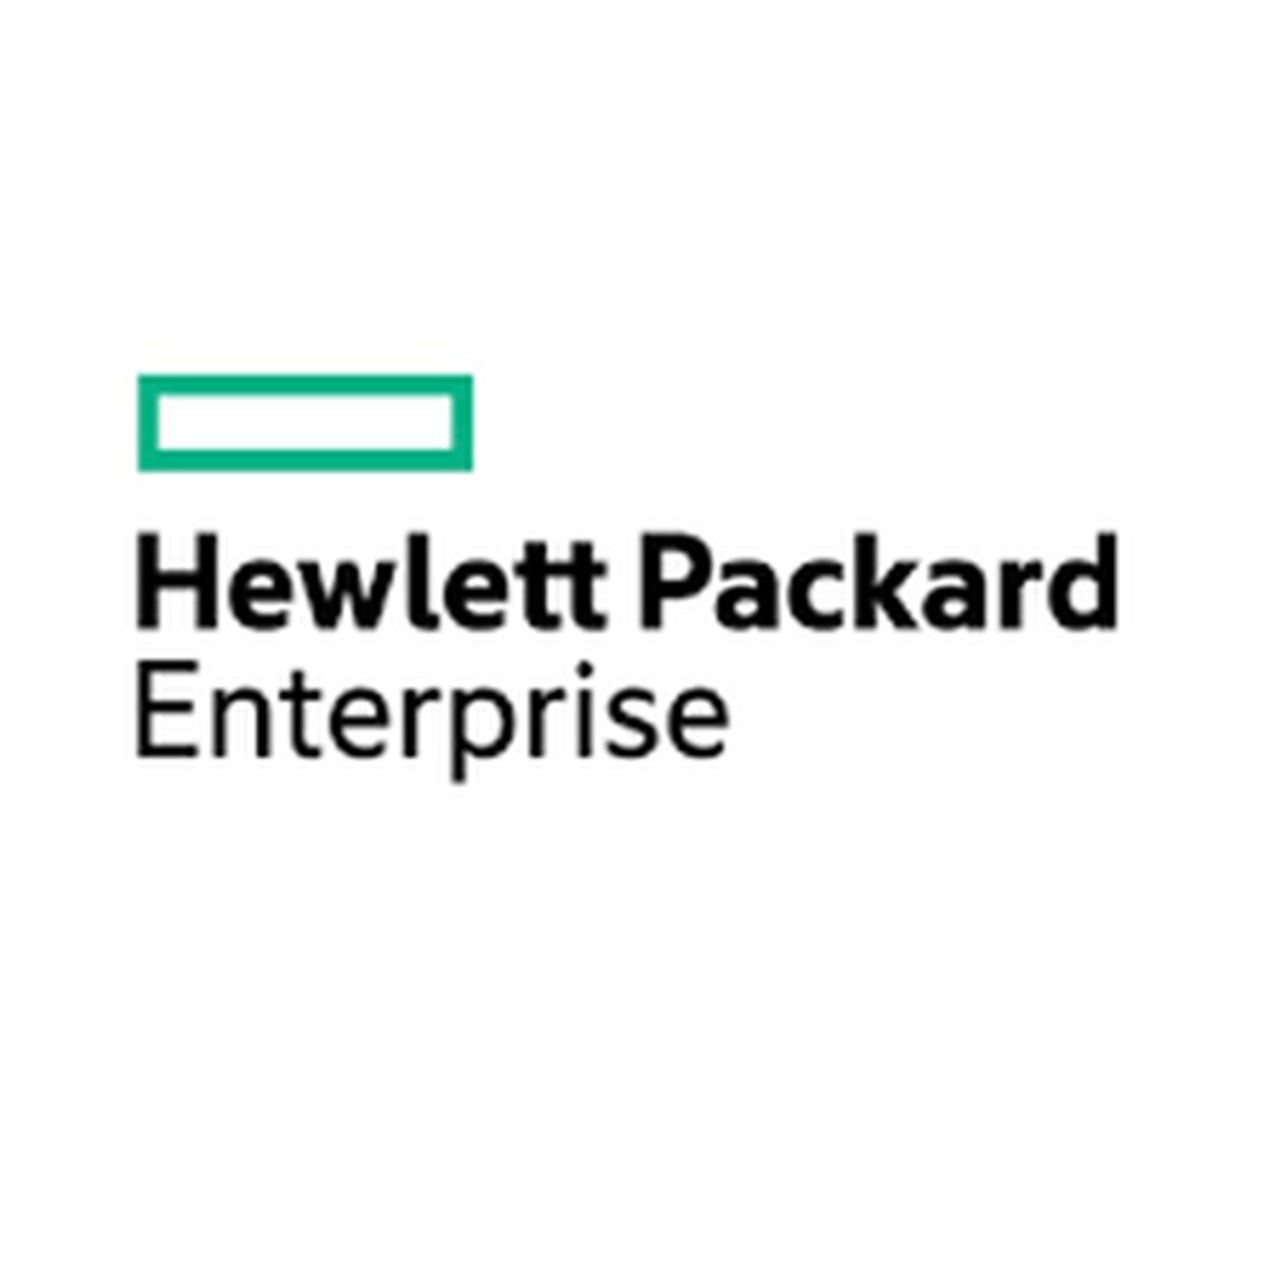 HPE SY480/660 Gen10 Xn-G 6238L Reman Kit (Sourcing) - HPE Discontinued Product)